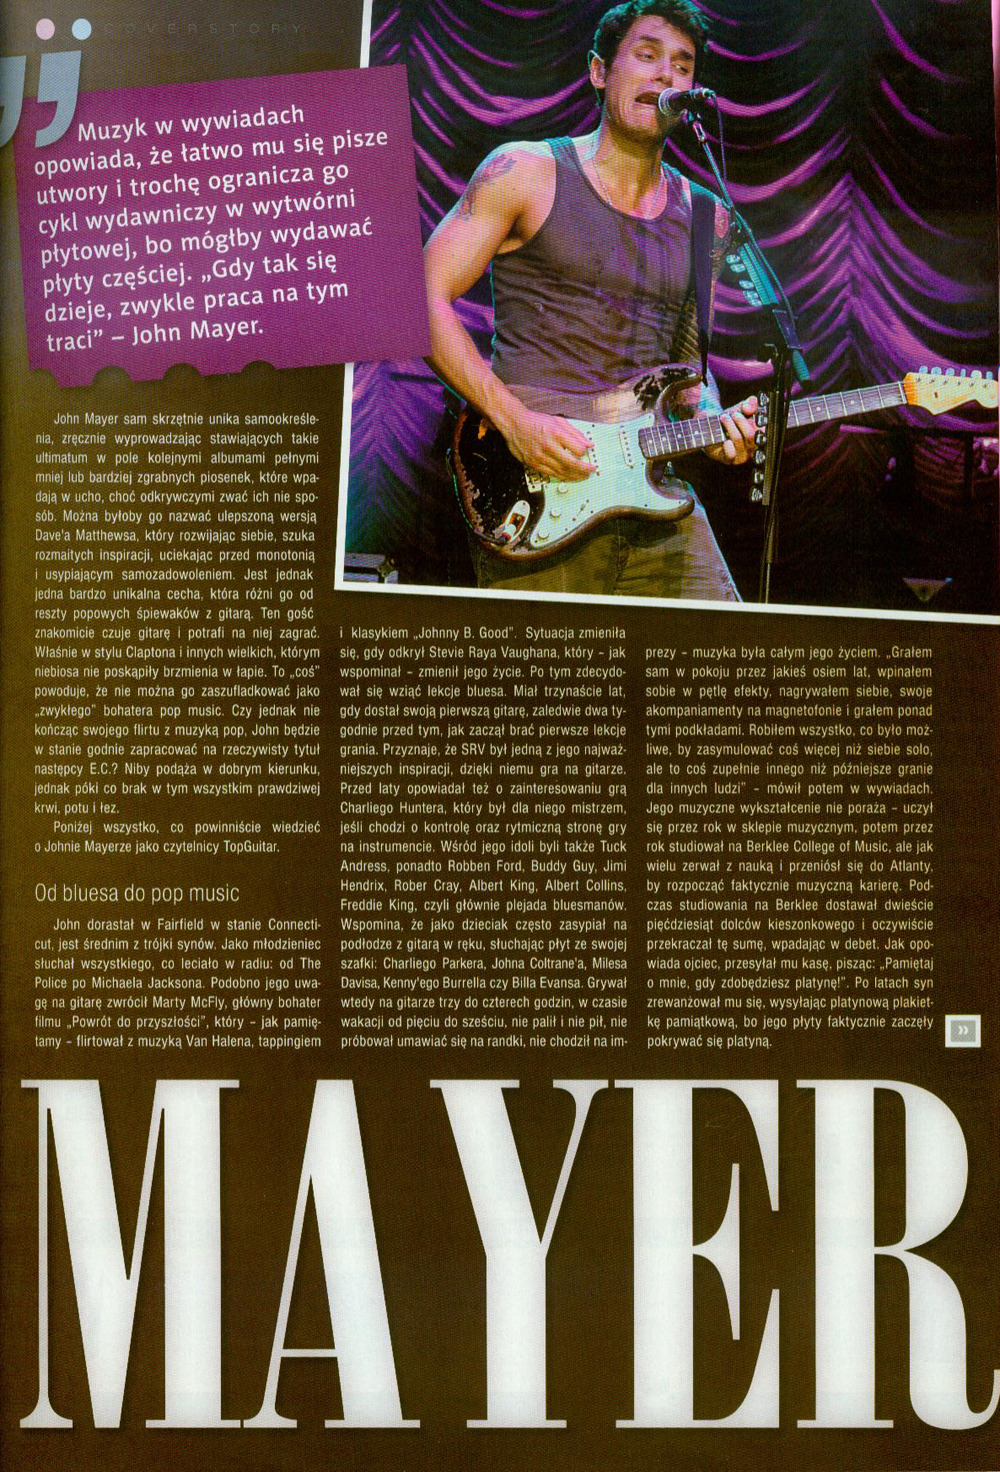 John Mayer on Top Guitar magazine (Poland) | The Gear Page